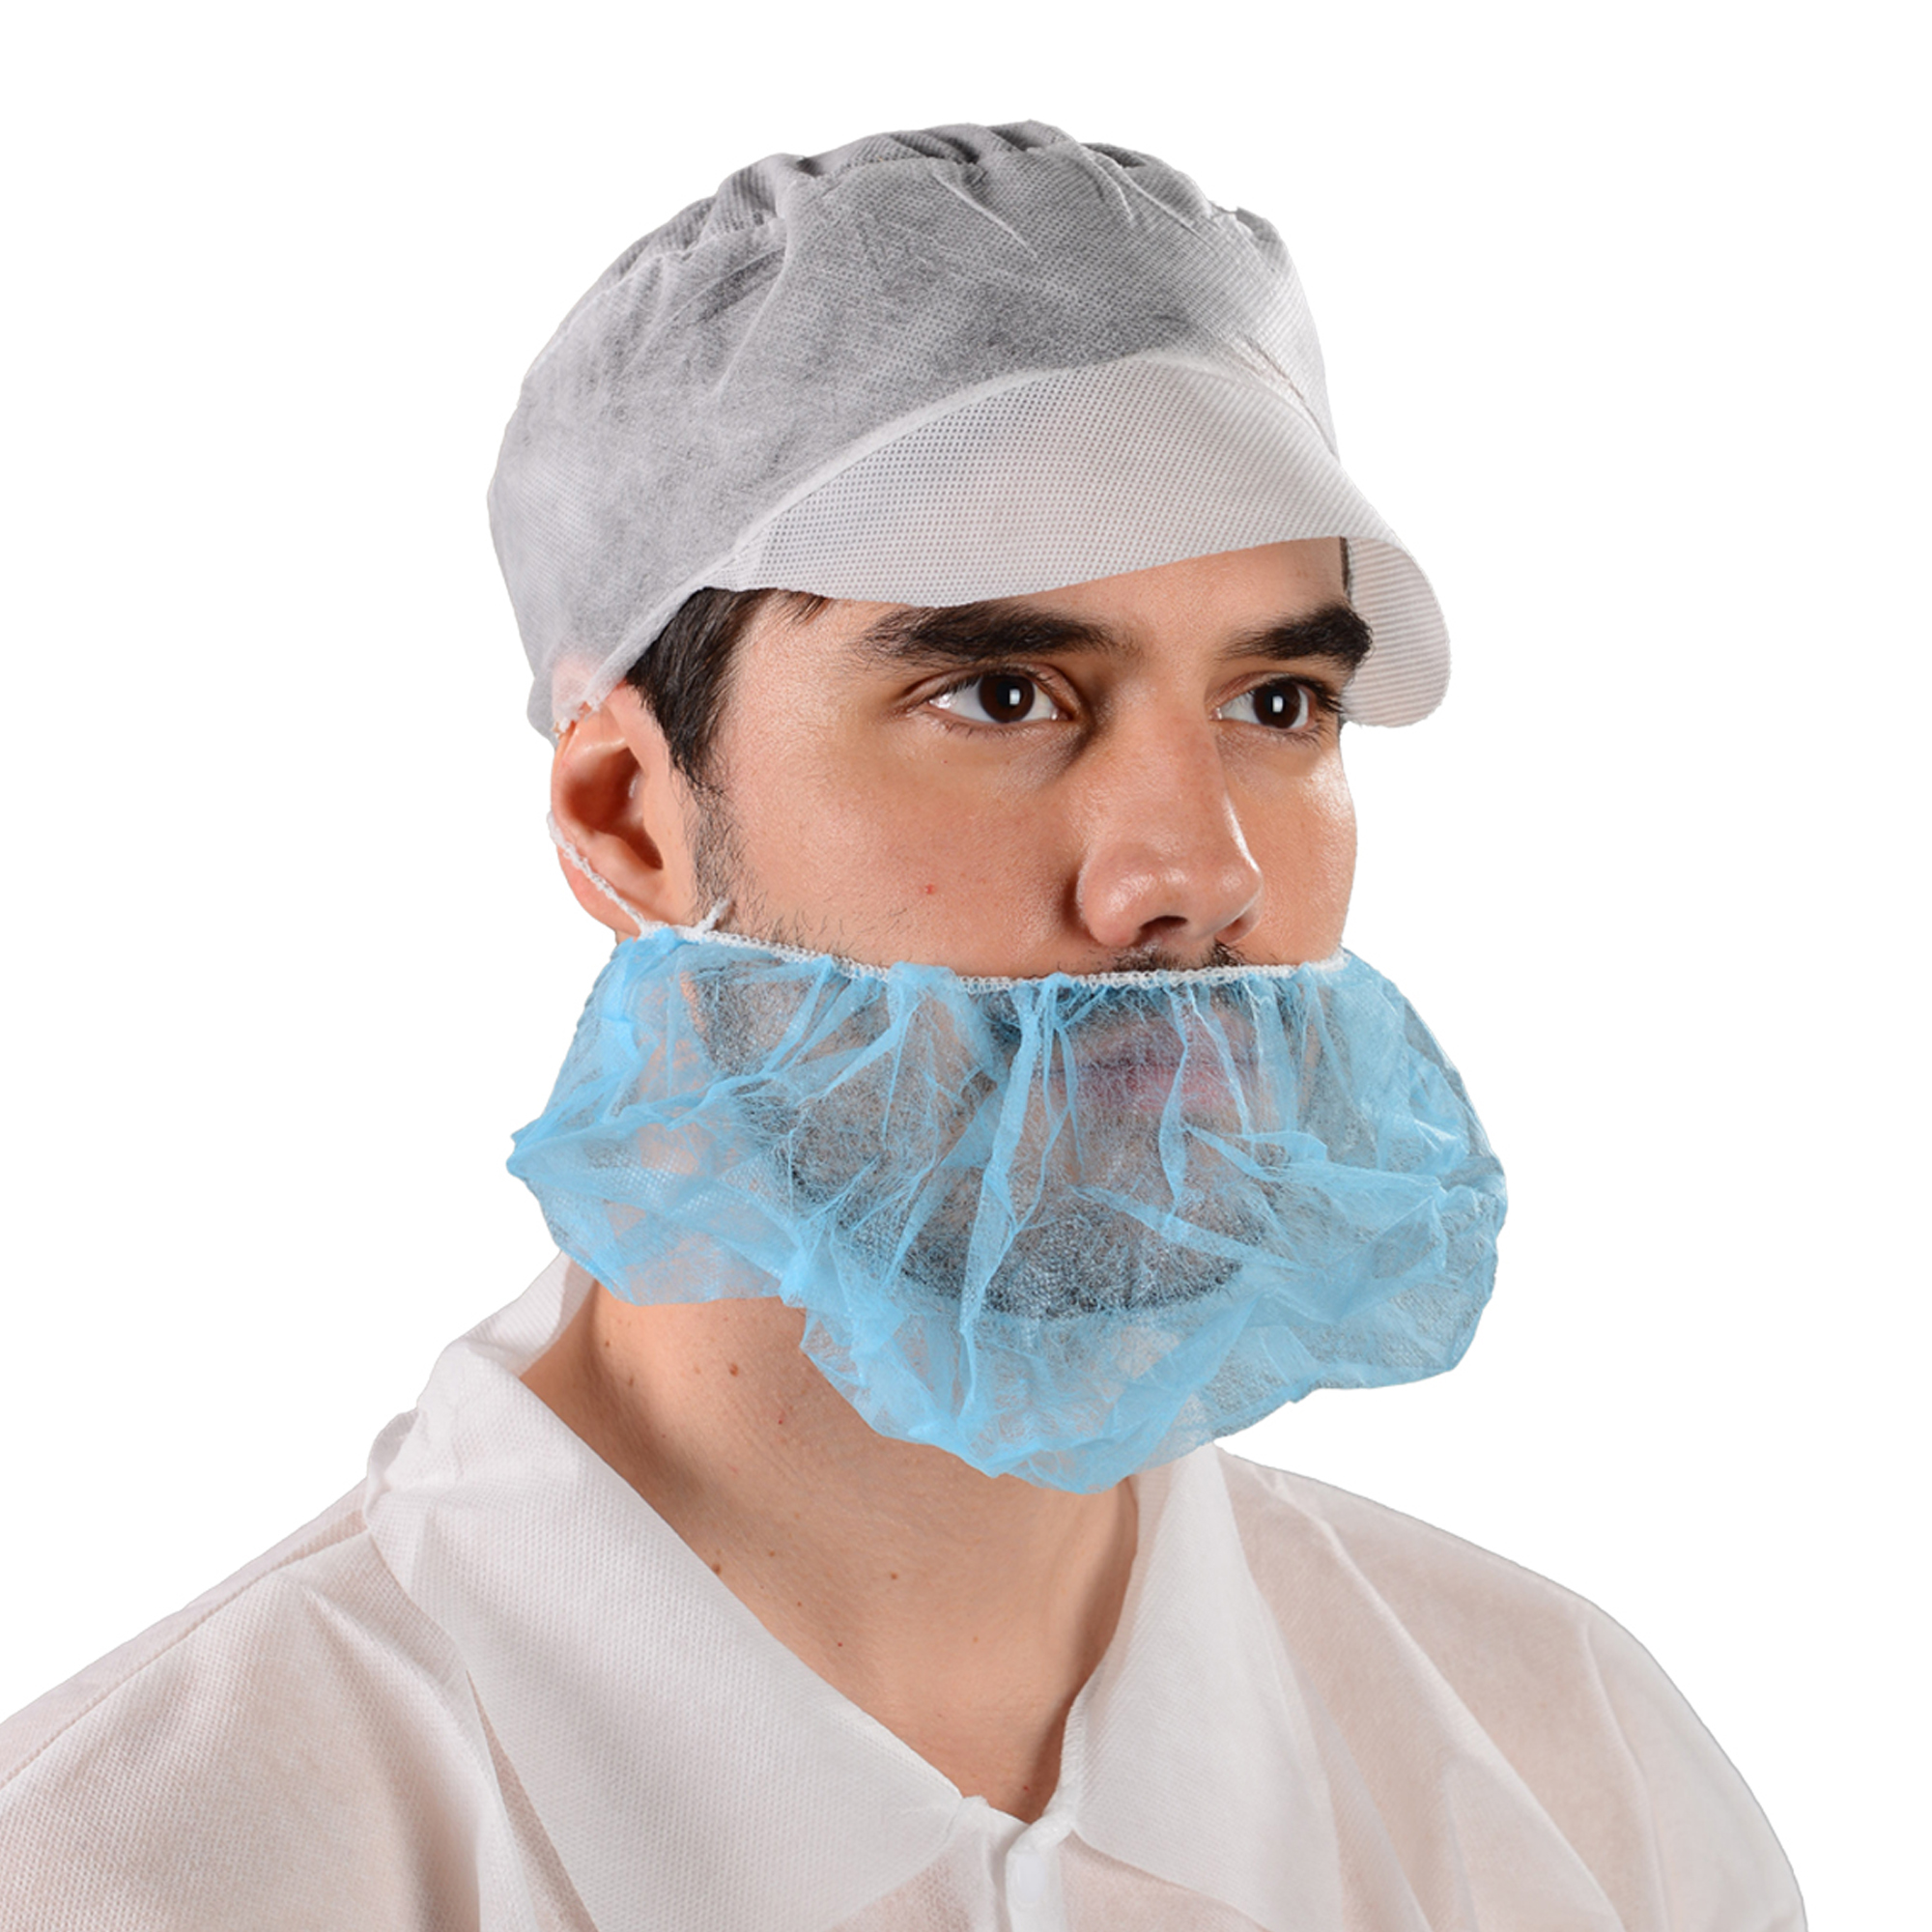 TOPMED White 10gsm Disposable PP Nonwoven Beard Cover Food Industry Single Loop Men with Single Rib Dust Proof Beard Hair Net